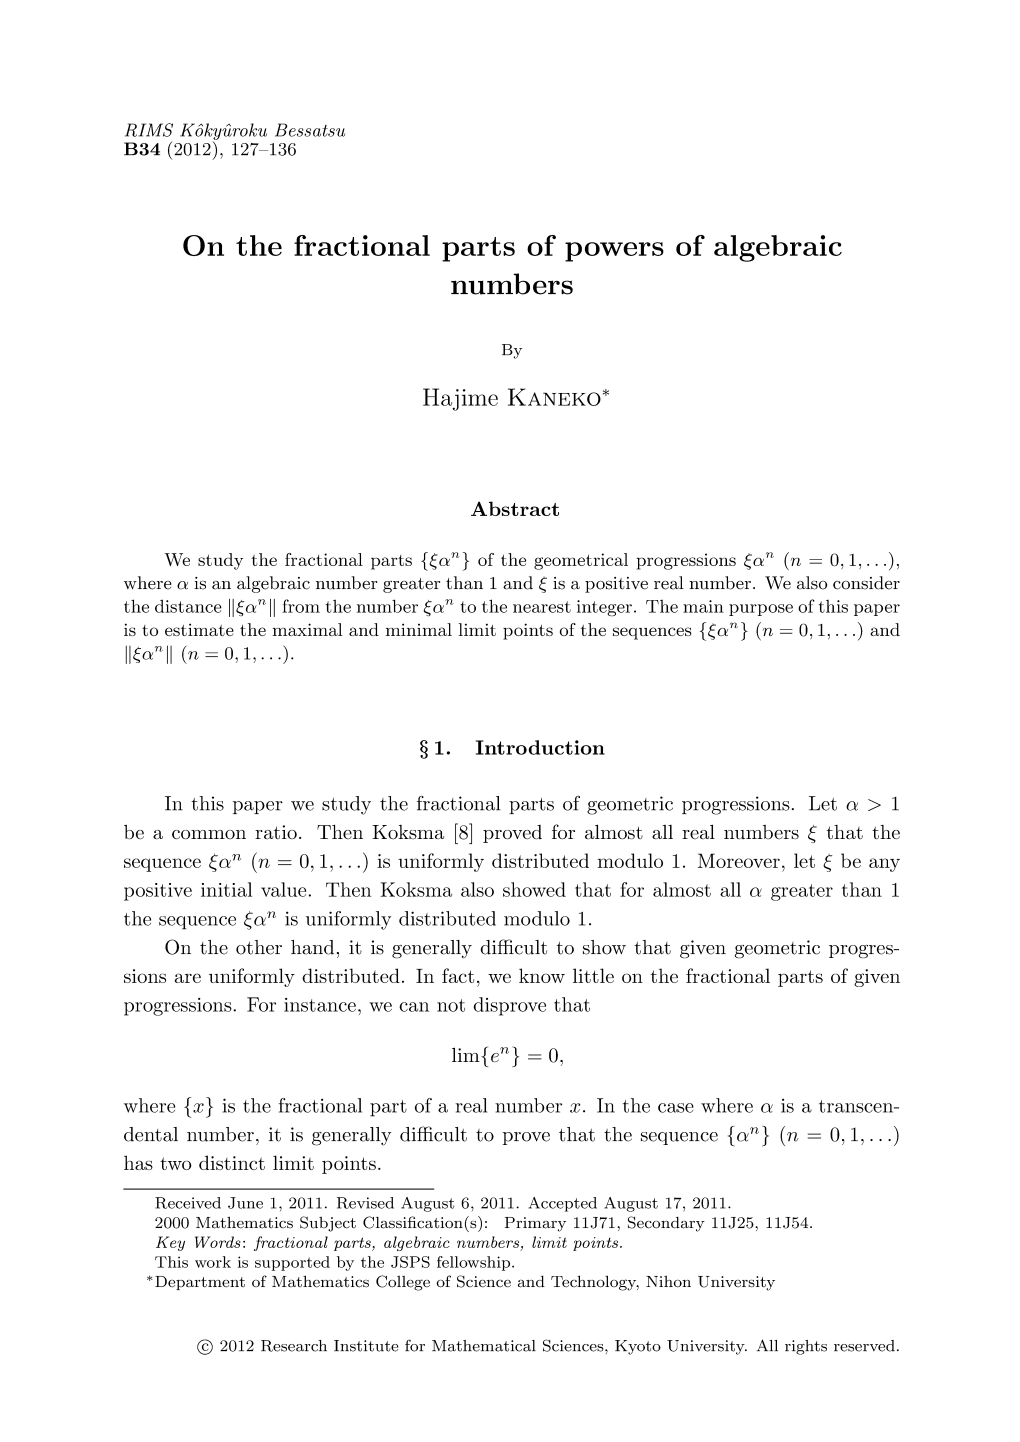 On the Fractional Parts of Powers of Algebraic Numbers